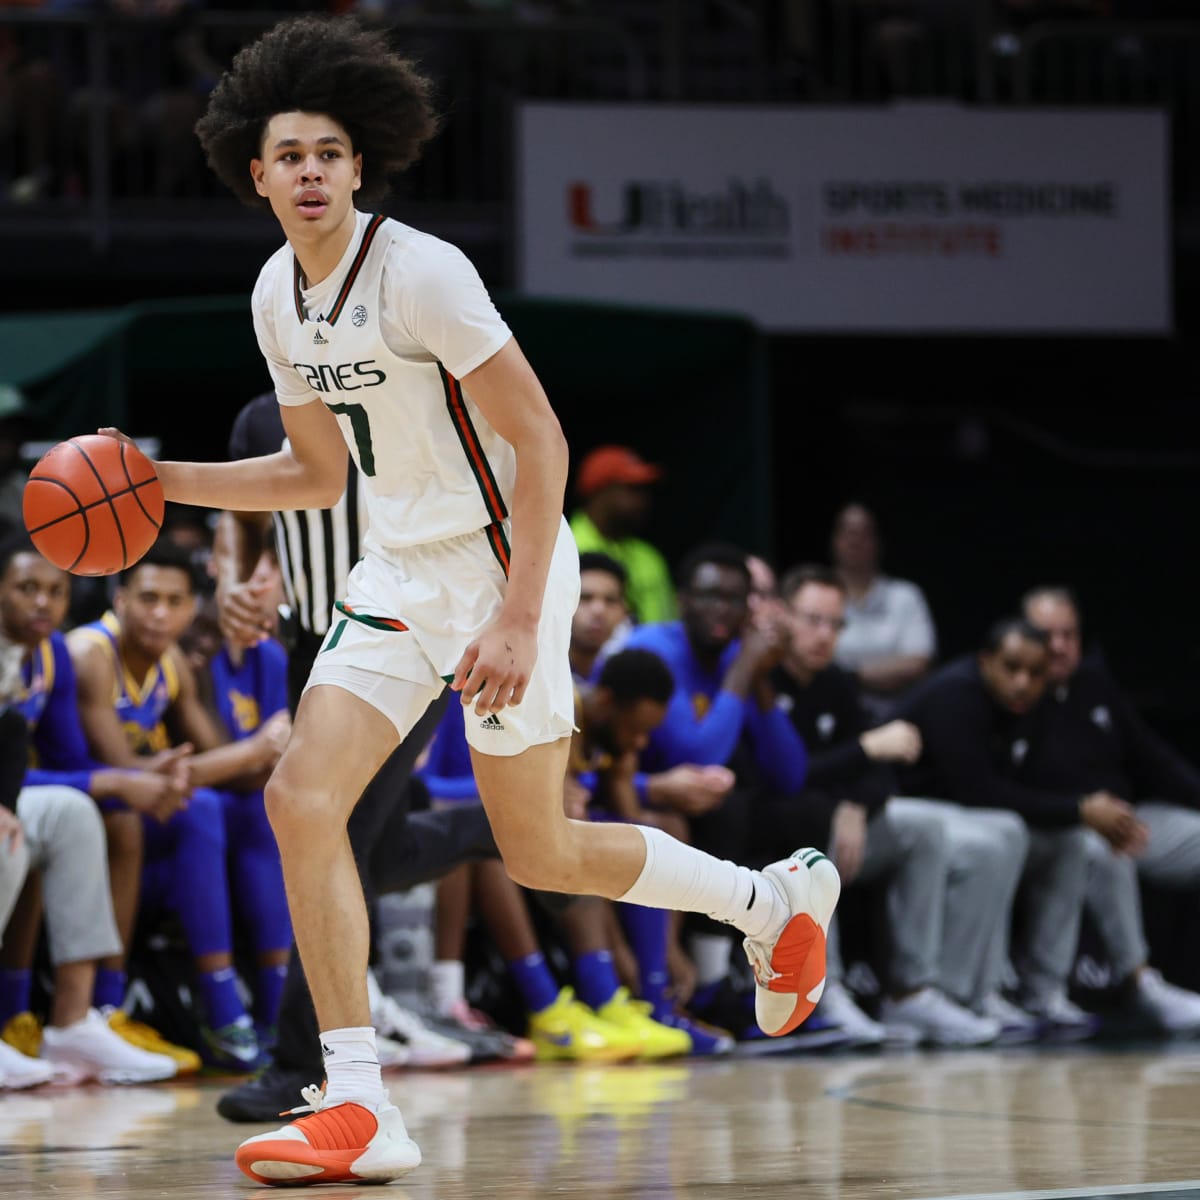 NBA Draft Scouting Report: Miami's Kyshawn George - NBA Draft Digest -  Latest Draft News and Prospect Rankings